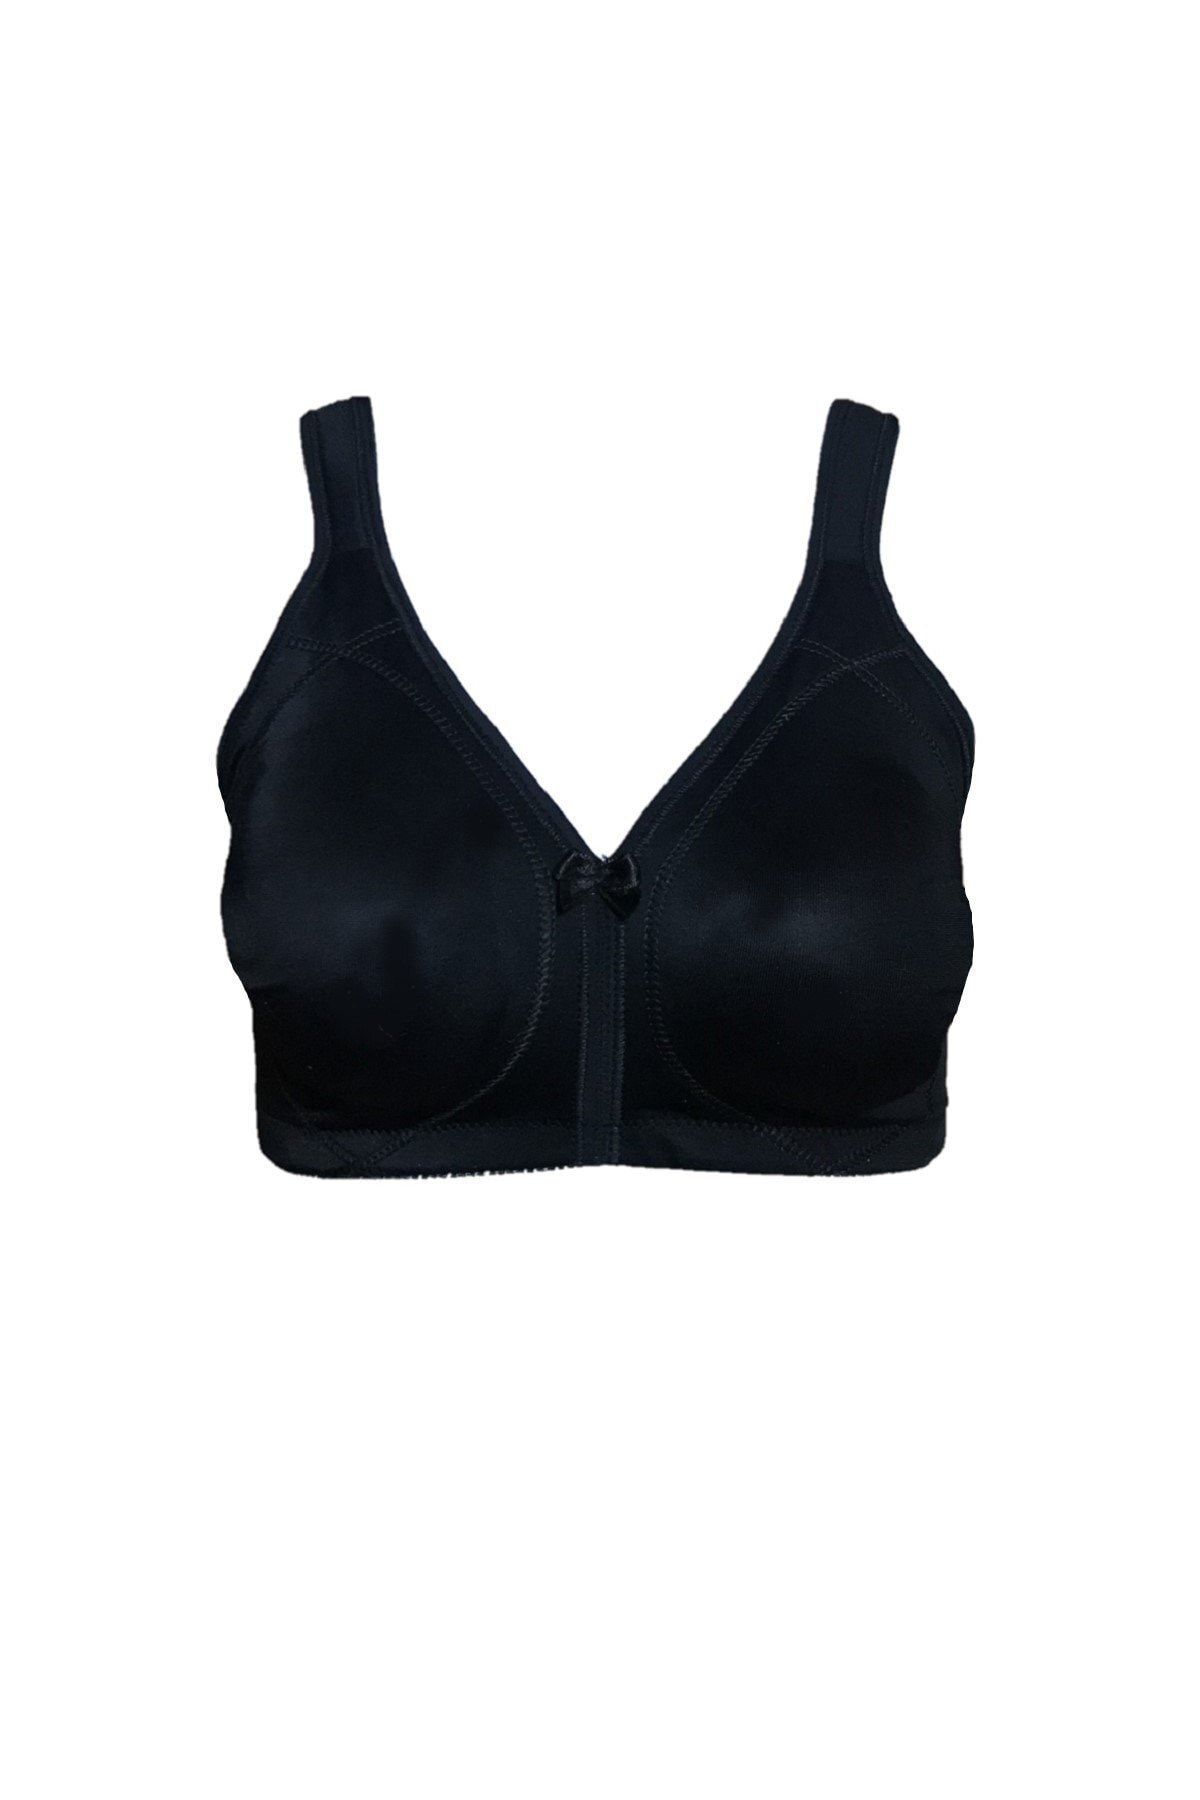 Belladonna Women's Black Miracle Bra that reduces size by two